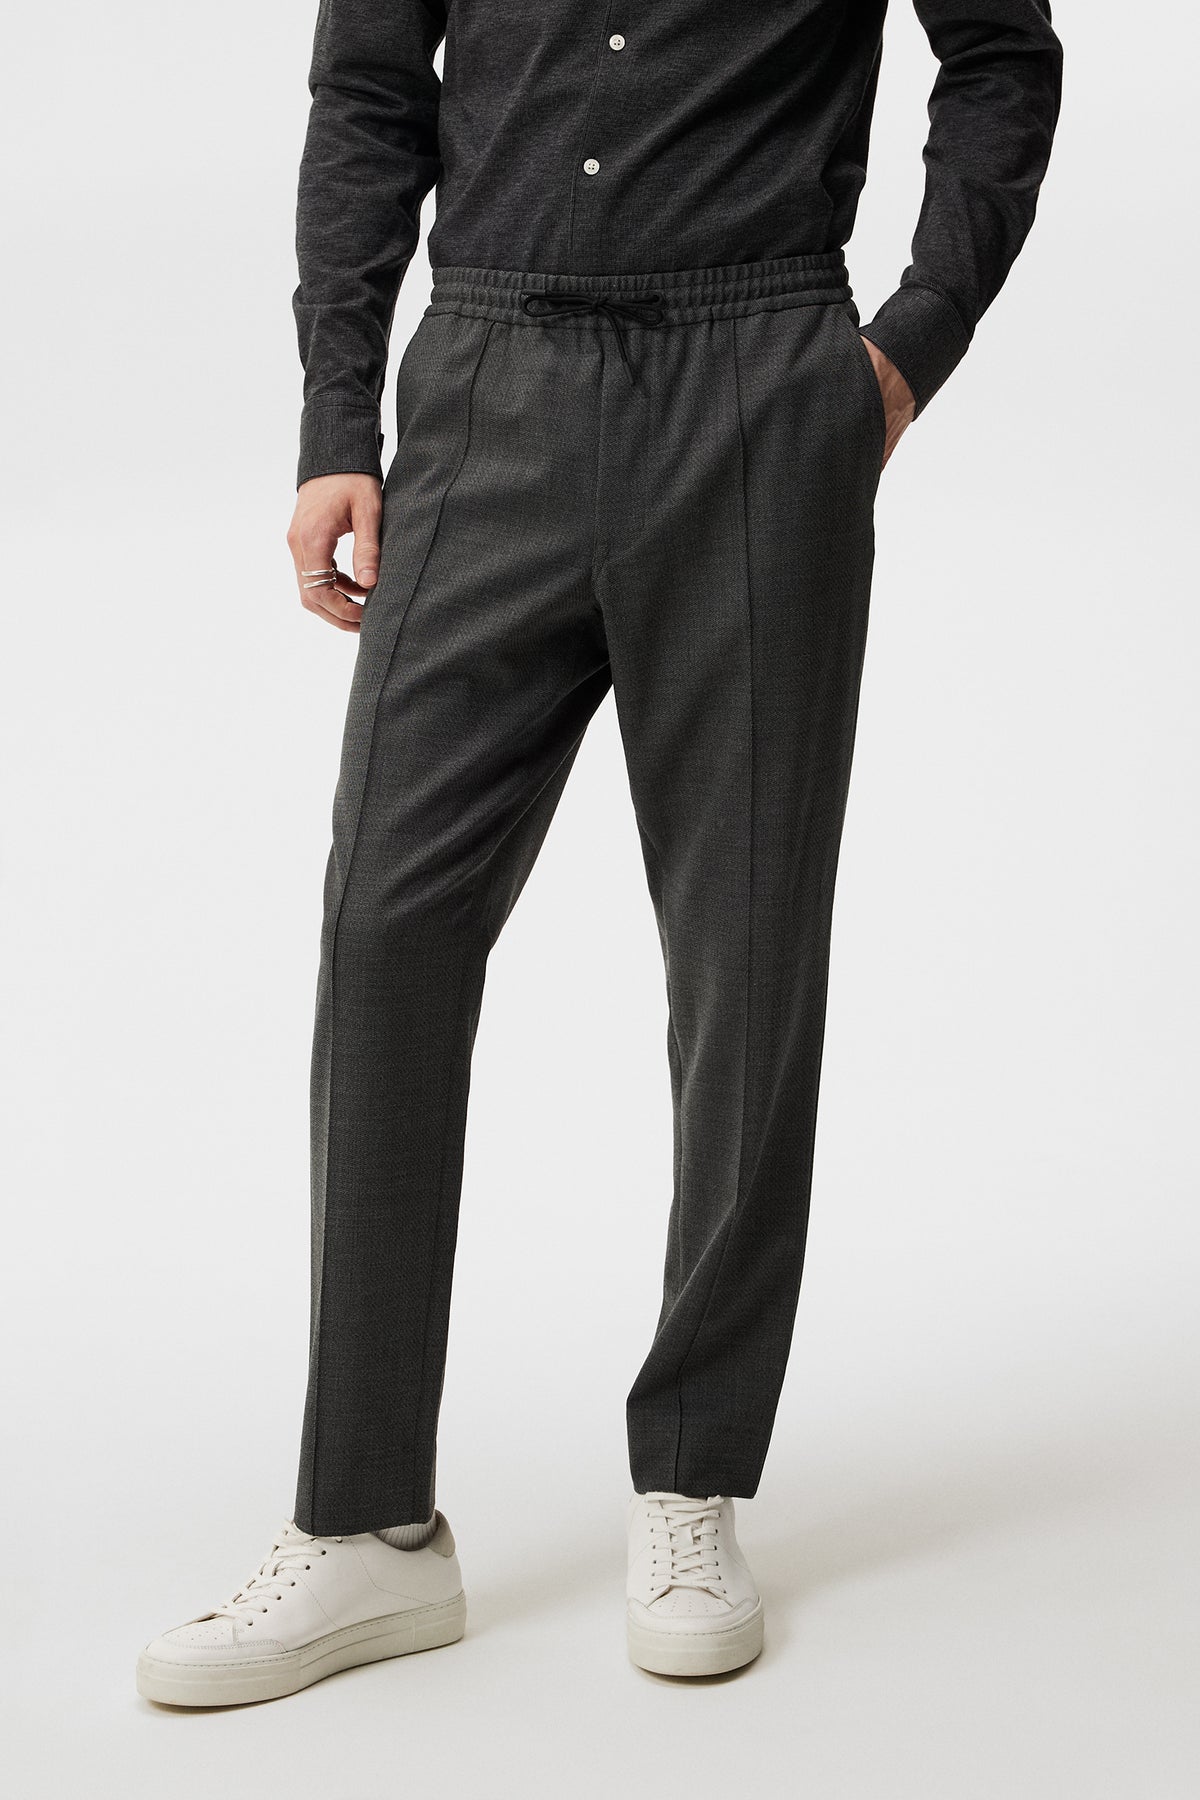 High waisted Sasha trousers (or the perfect tailored pants